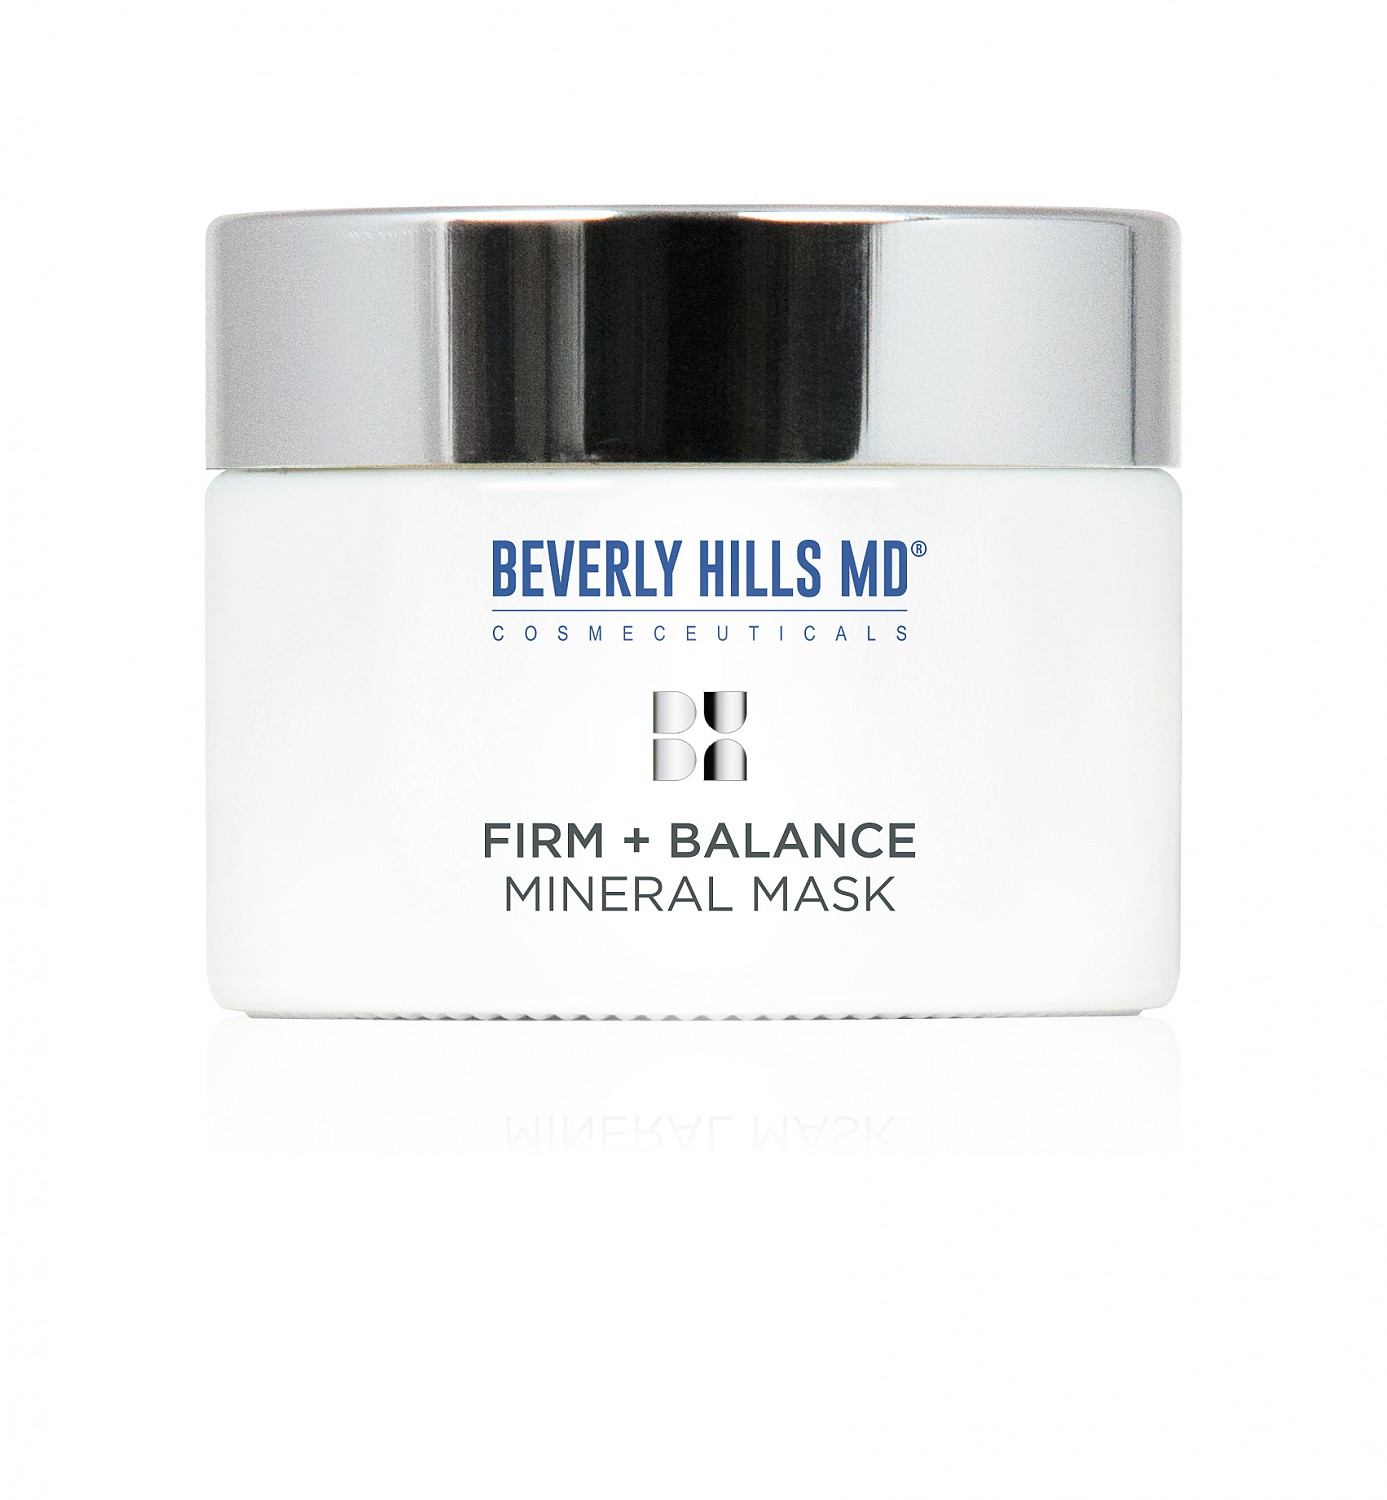 Beverly Hills MD Firm + Balance Mineral Mask